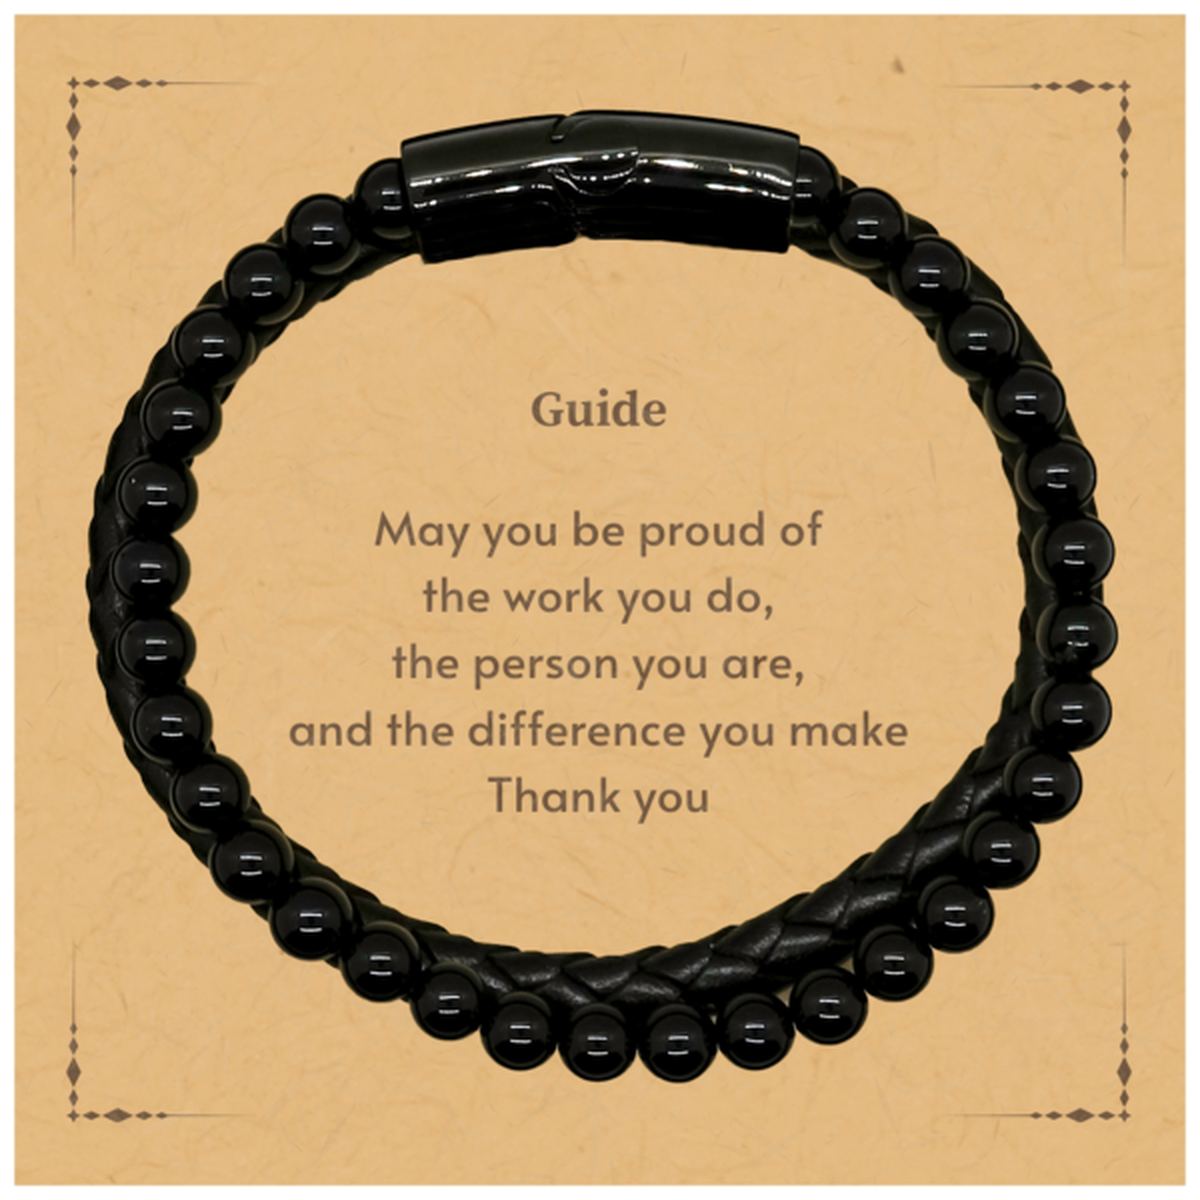 Heartwarming Stone Leather Bracelets Retirement Coworkers Gifts for Guide, Guide May You be proud of the work you do, the person you are Gifts for Boss Men Women Friends